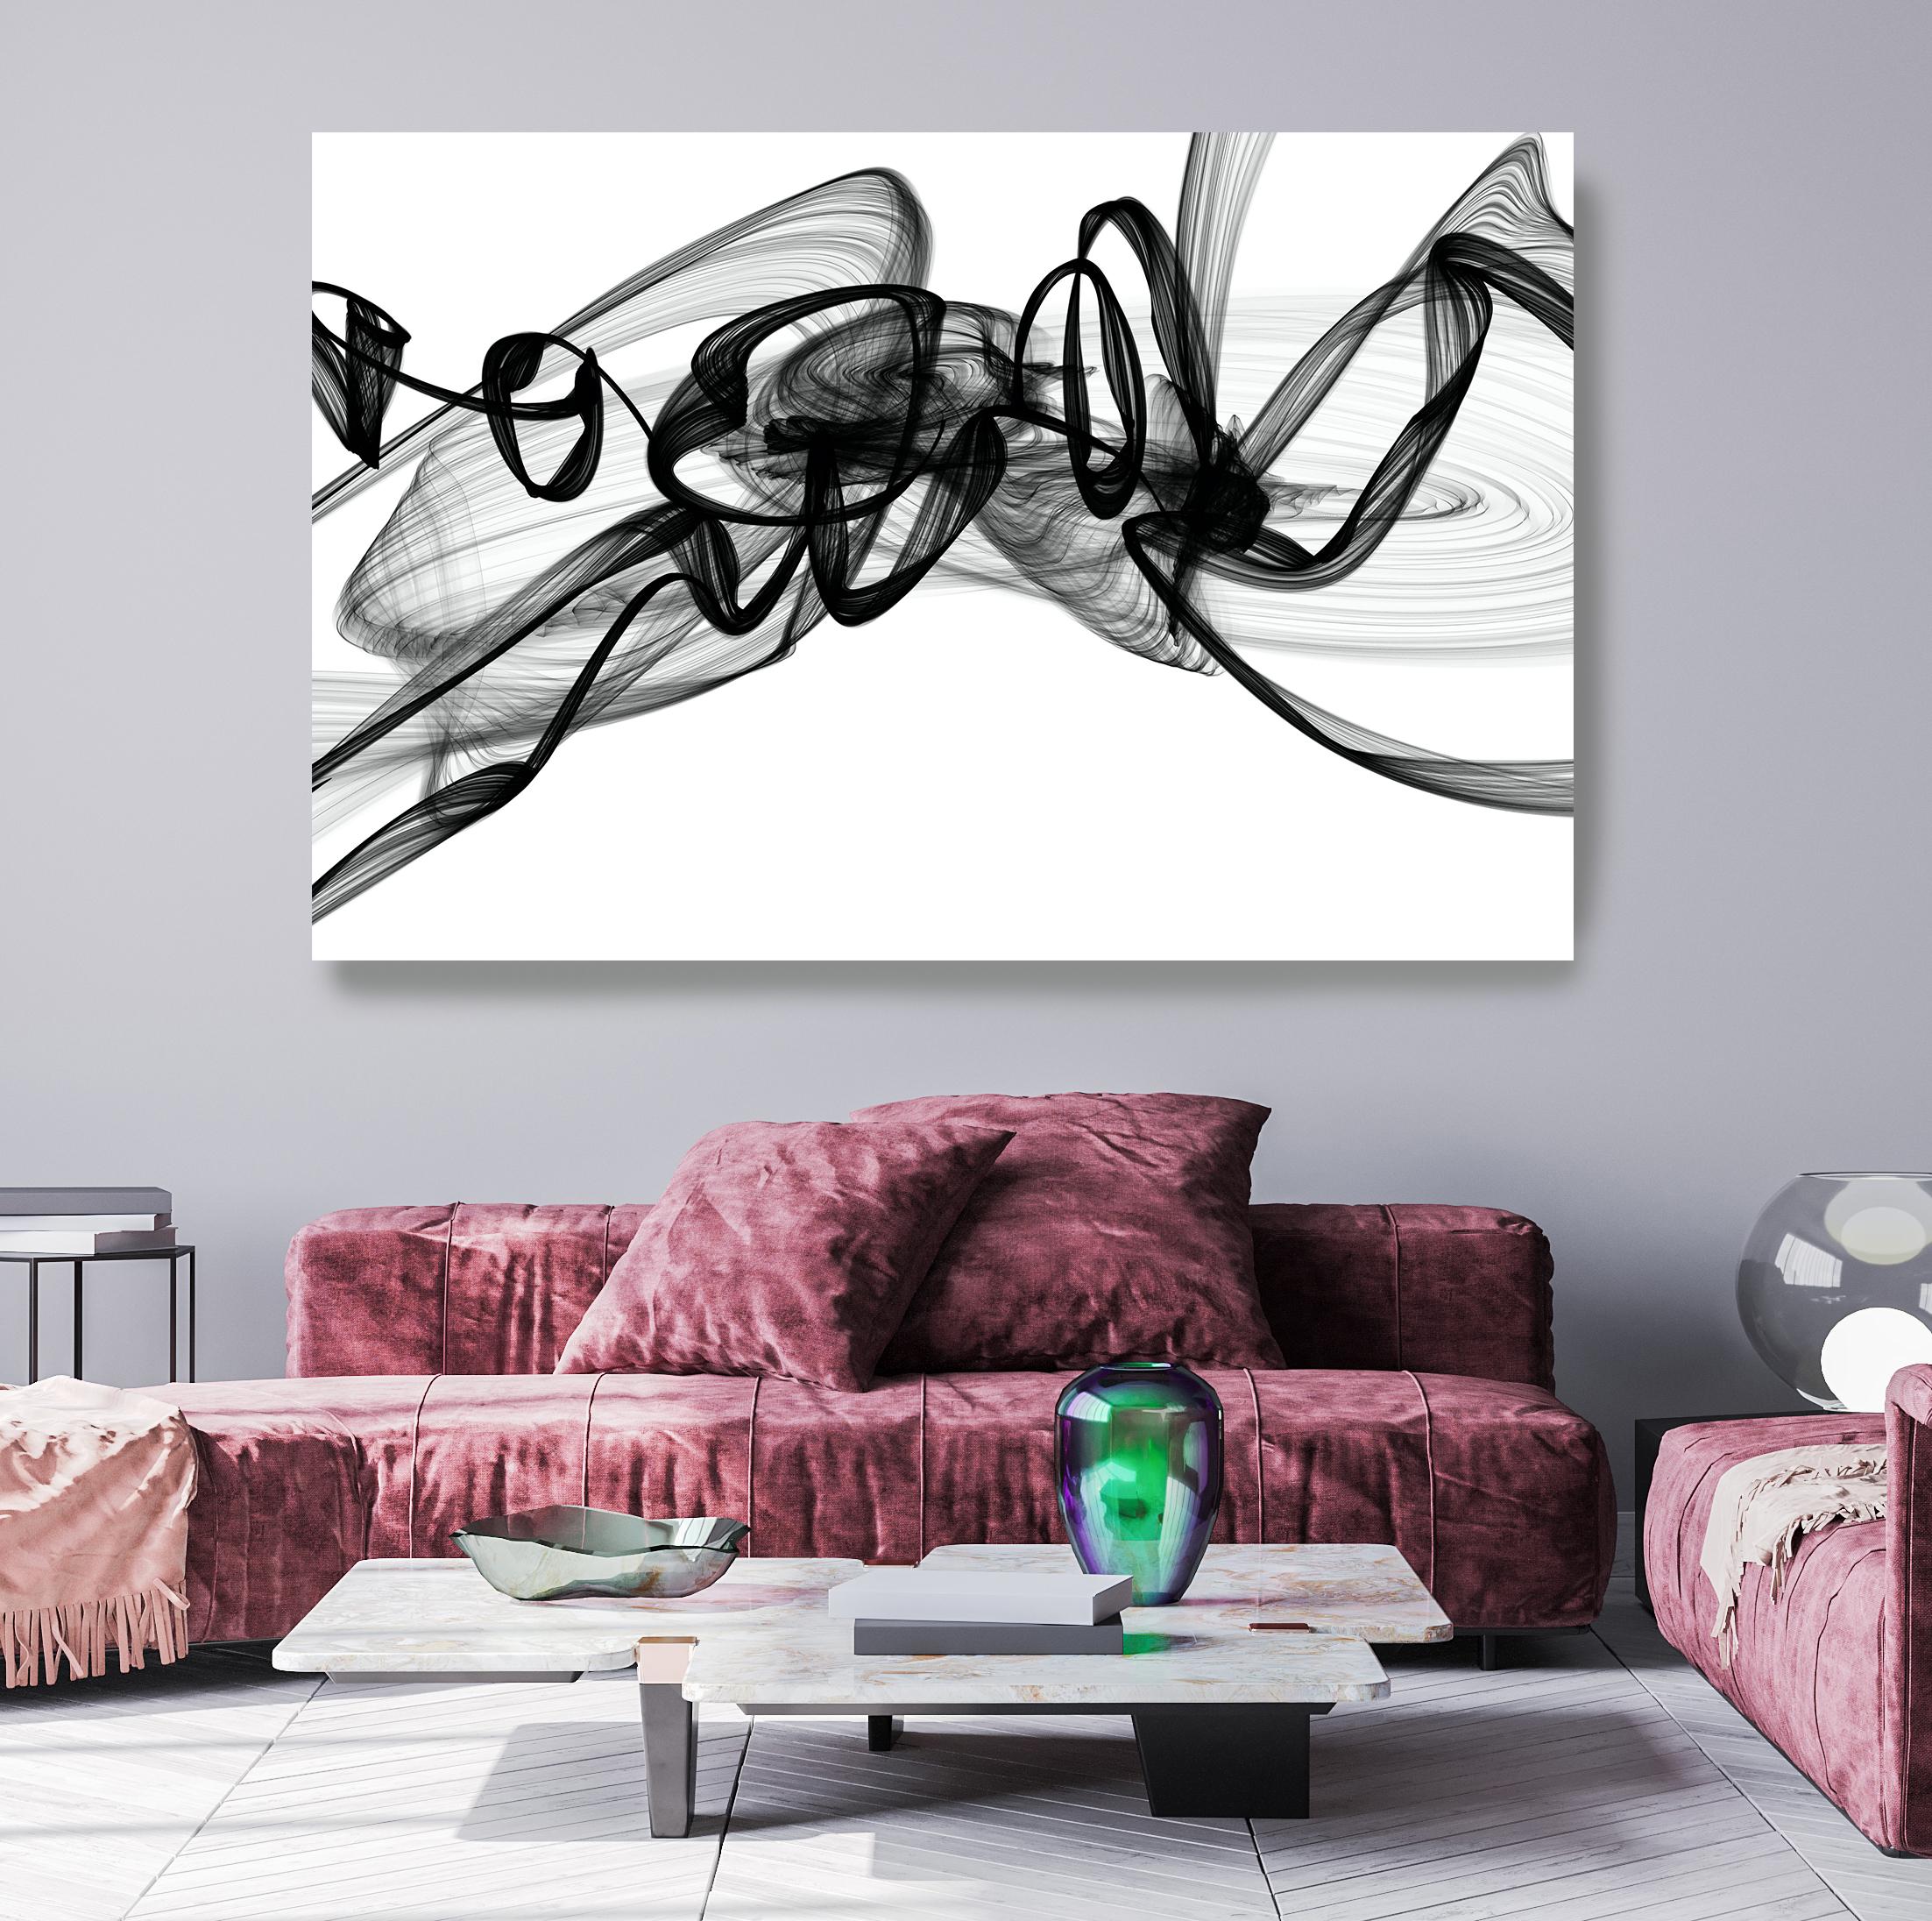 Irena Orlov Abstract Painting - Black and White Modern Minimalist New Media vs Painting 40"H X 80"W Vision